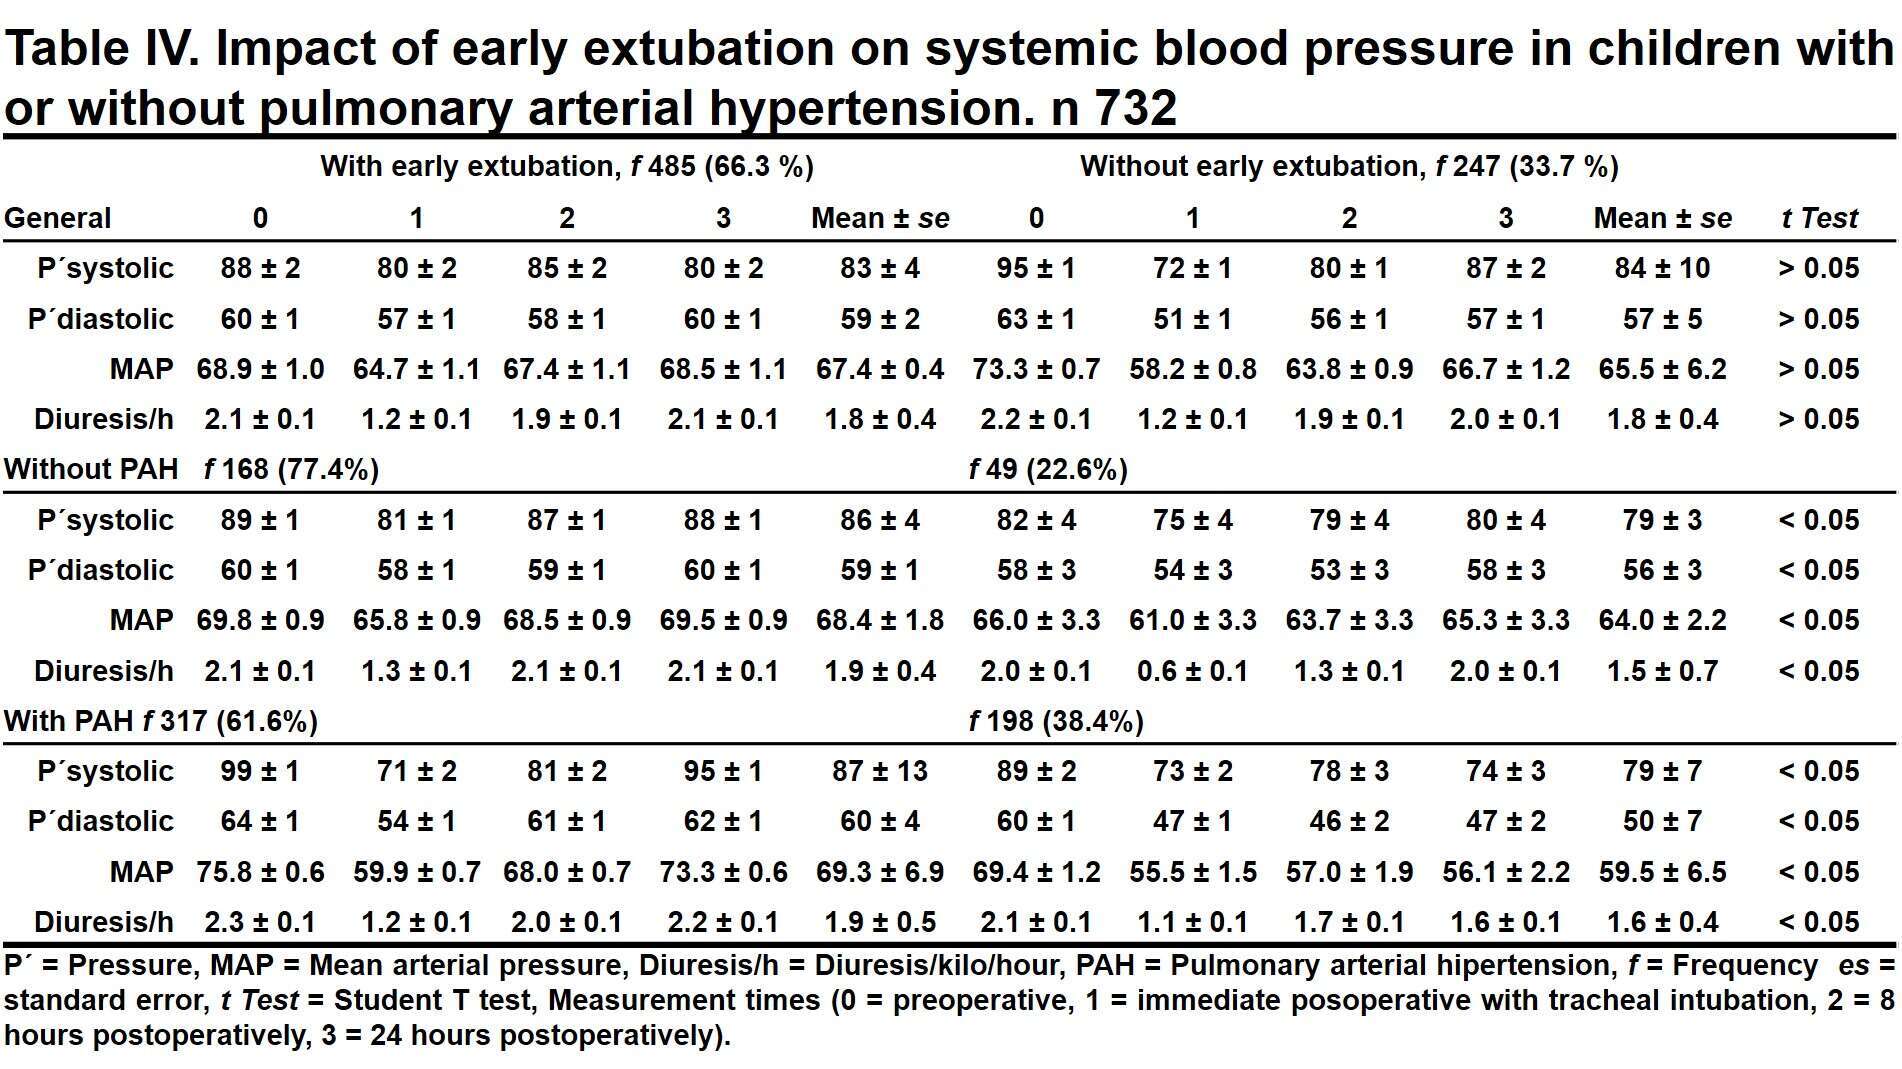 Table IV. Impact of early extubation on systemic blood pressure in children with or without pulmonary arterial hypertension